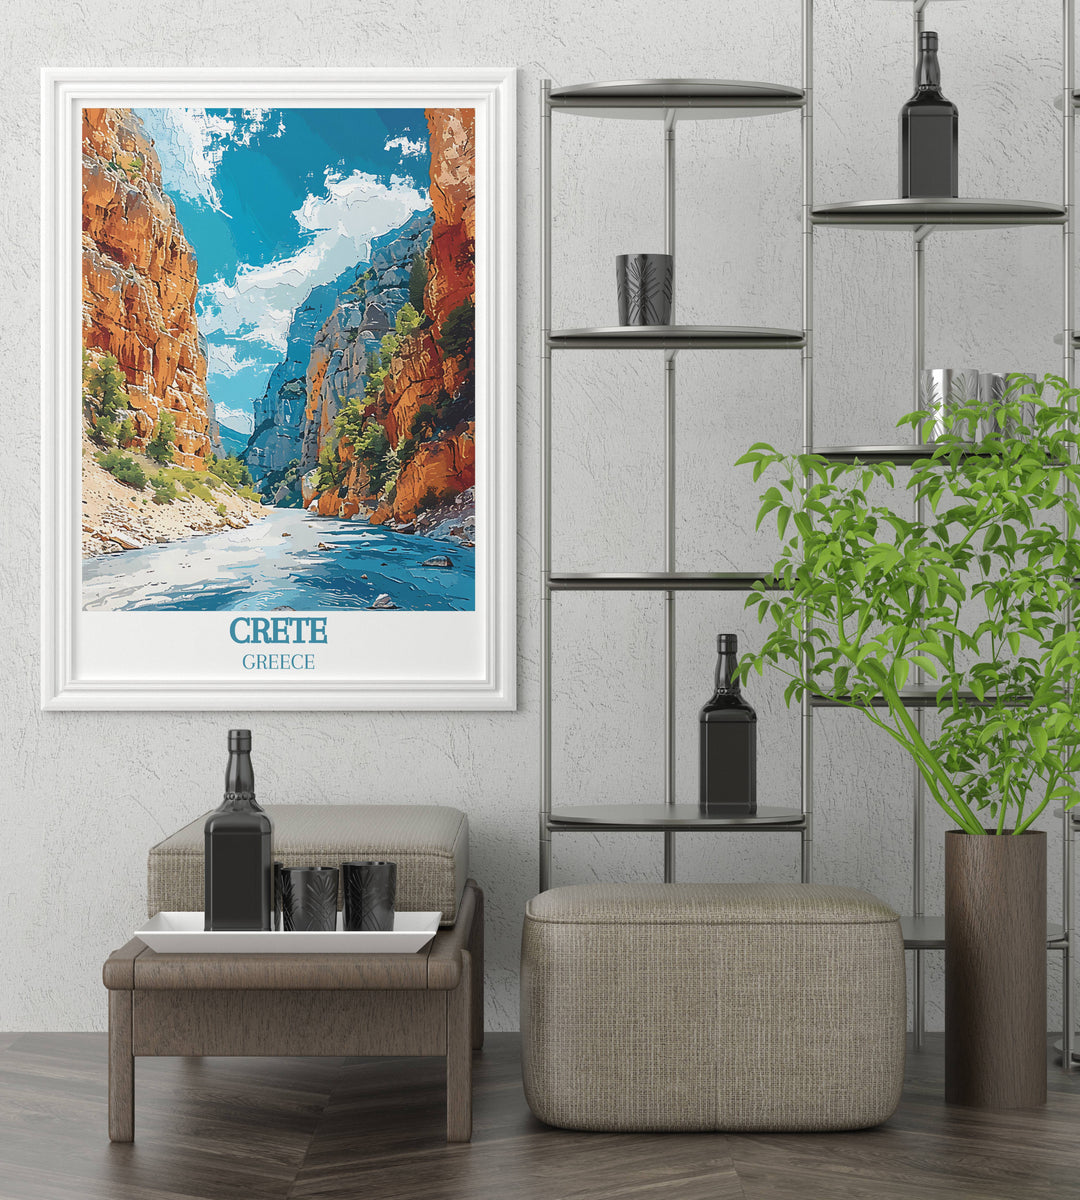 Detailed print of Samaria Gorge, focusing on the unique geological formations and the diverse ecosystem found within this famous Cretan landmark.